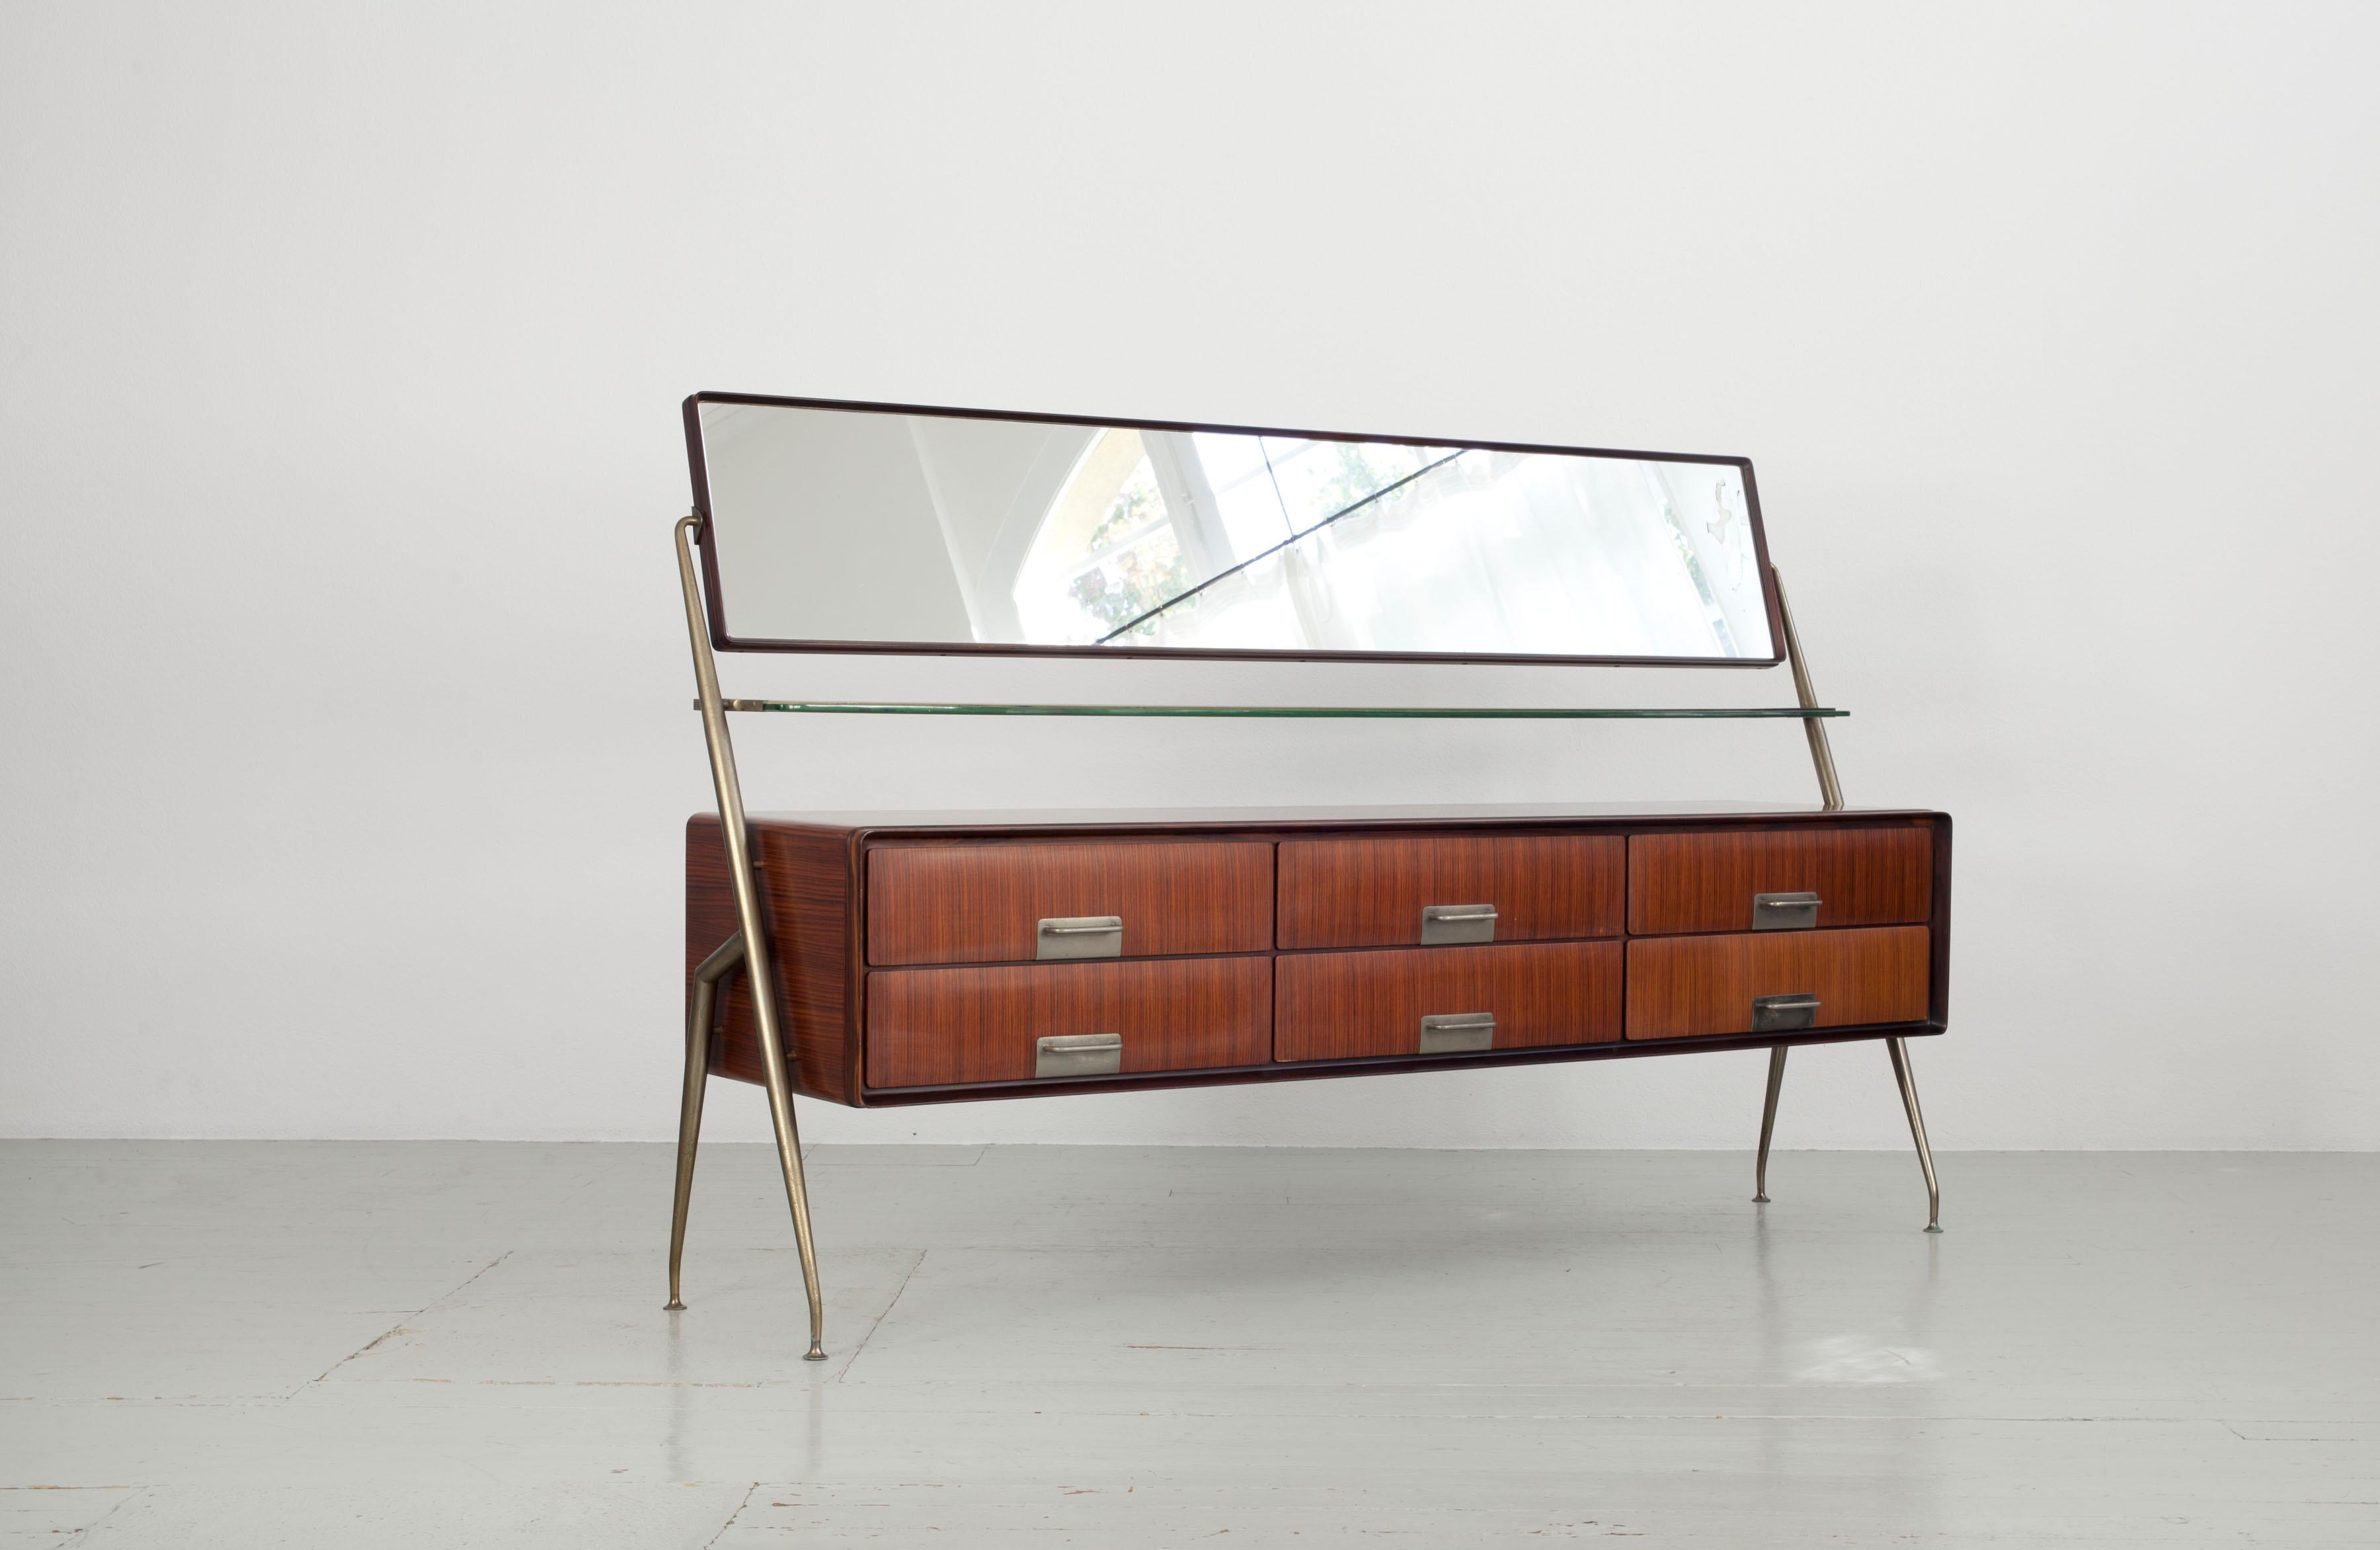 Sideboard with drawers, nickel-plated brass, mirrored glass and glass top.
Design: Silvio Cavatorta, Italy 1950s.